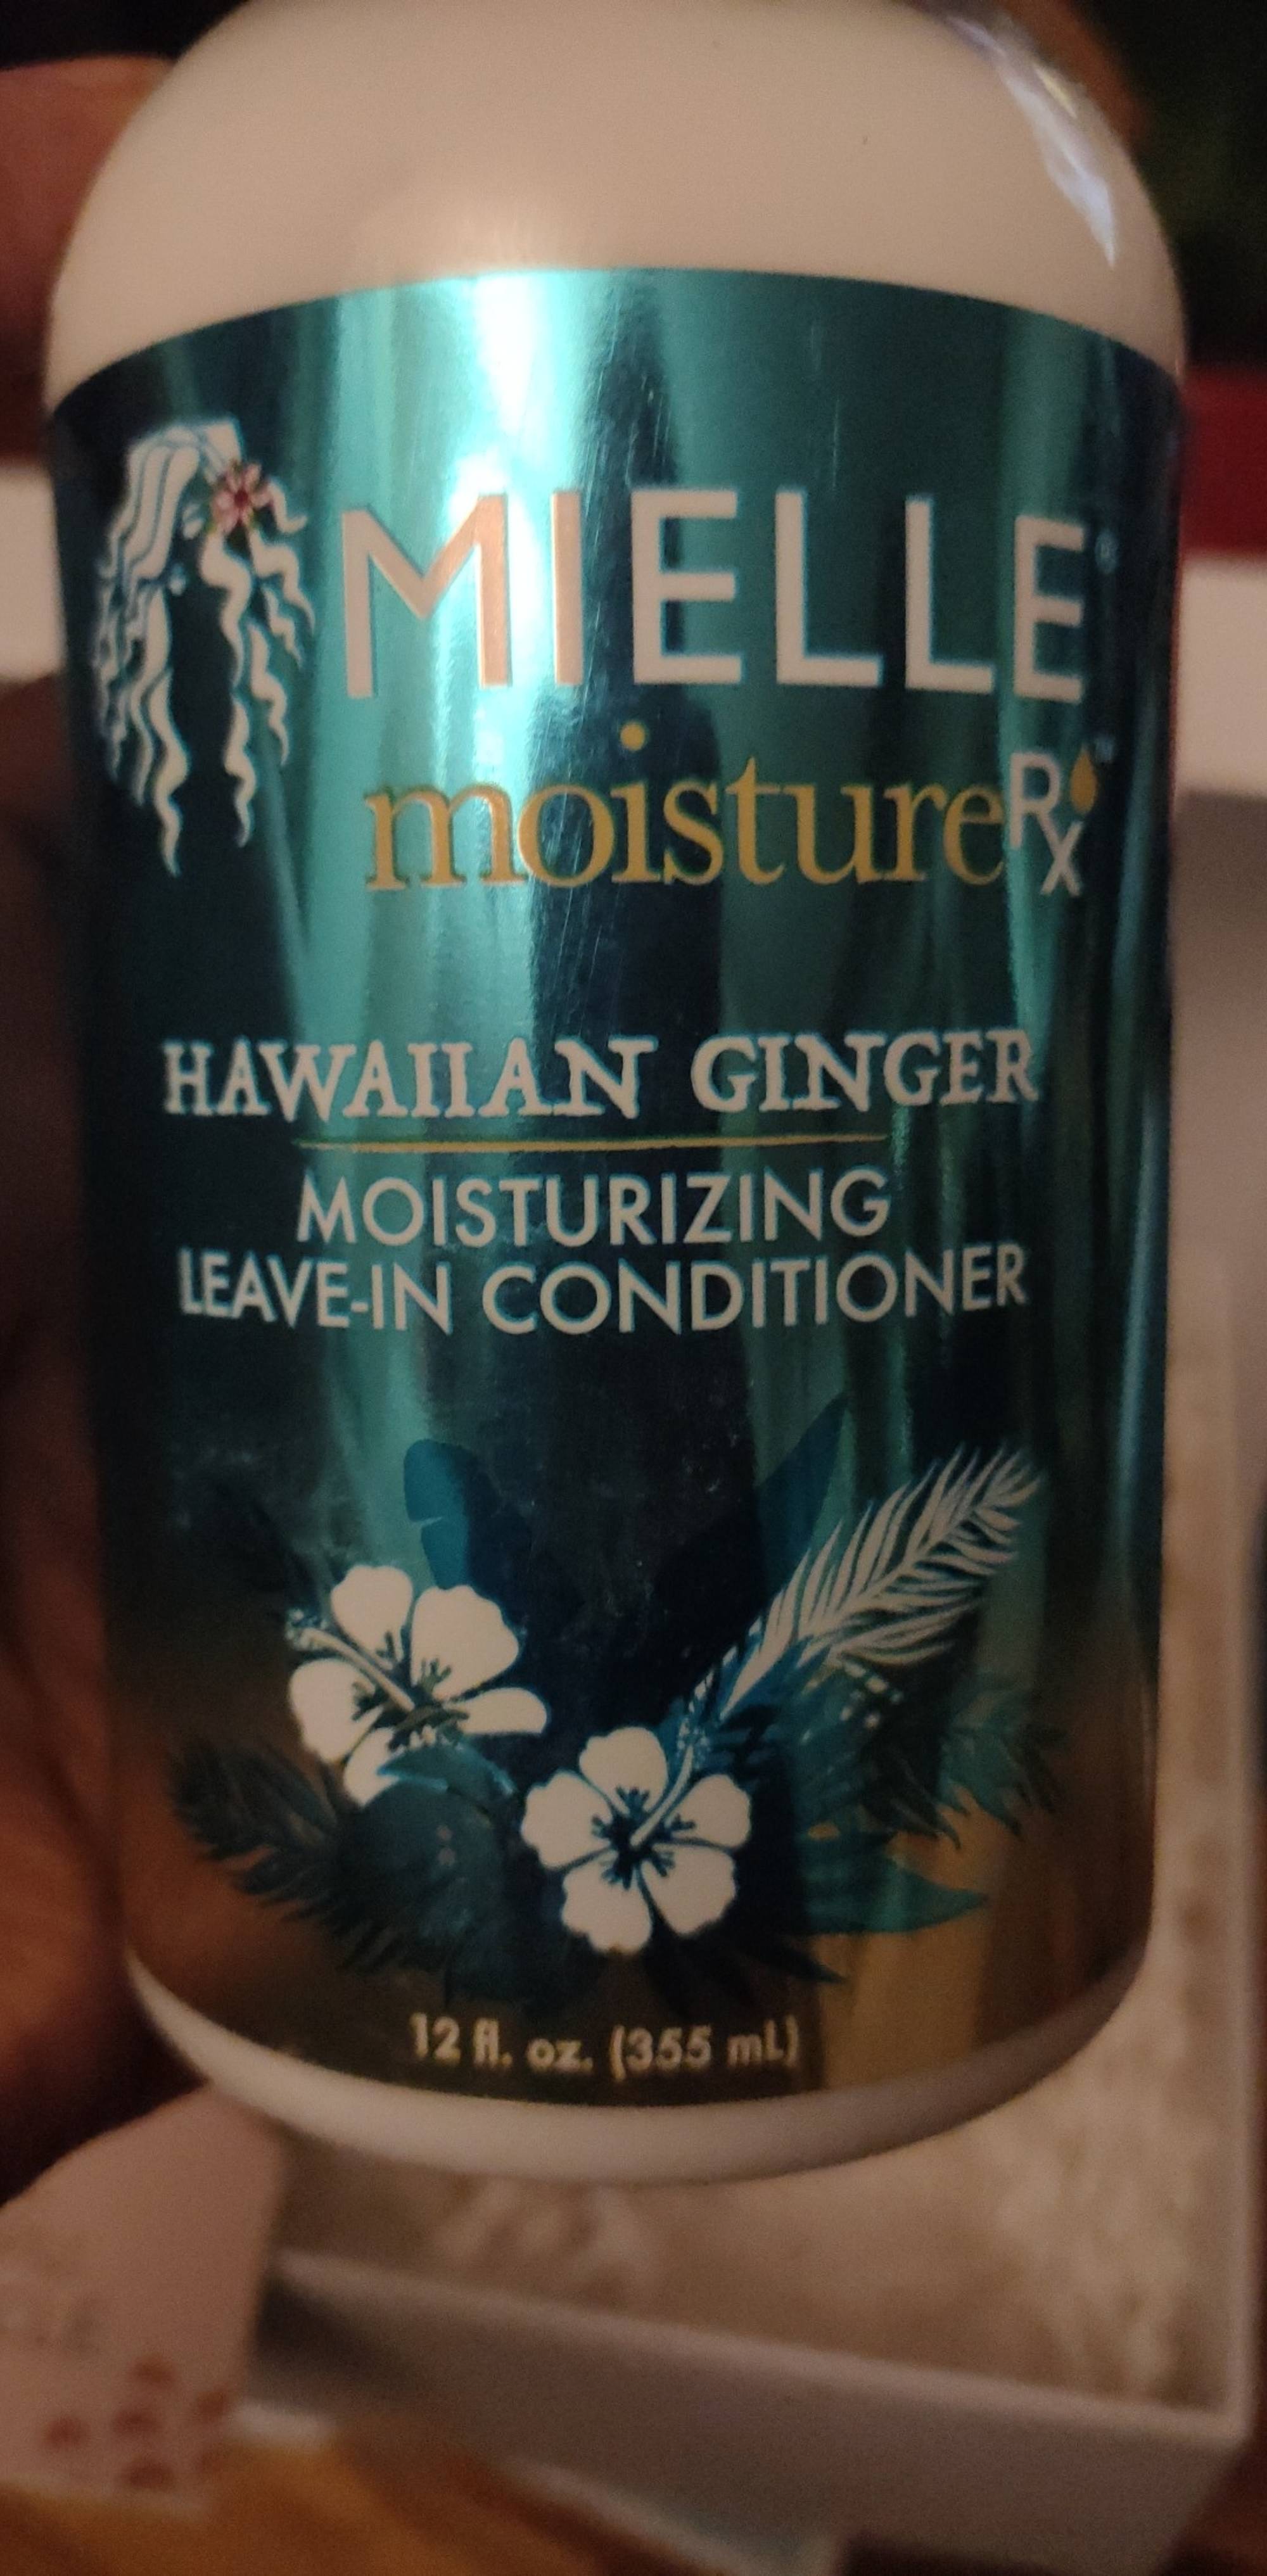 MIELLE - Hawaiian ginger -  Moisturizing leave-in conditioner